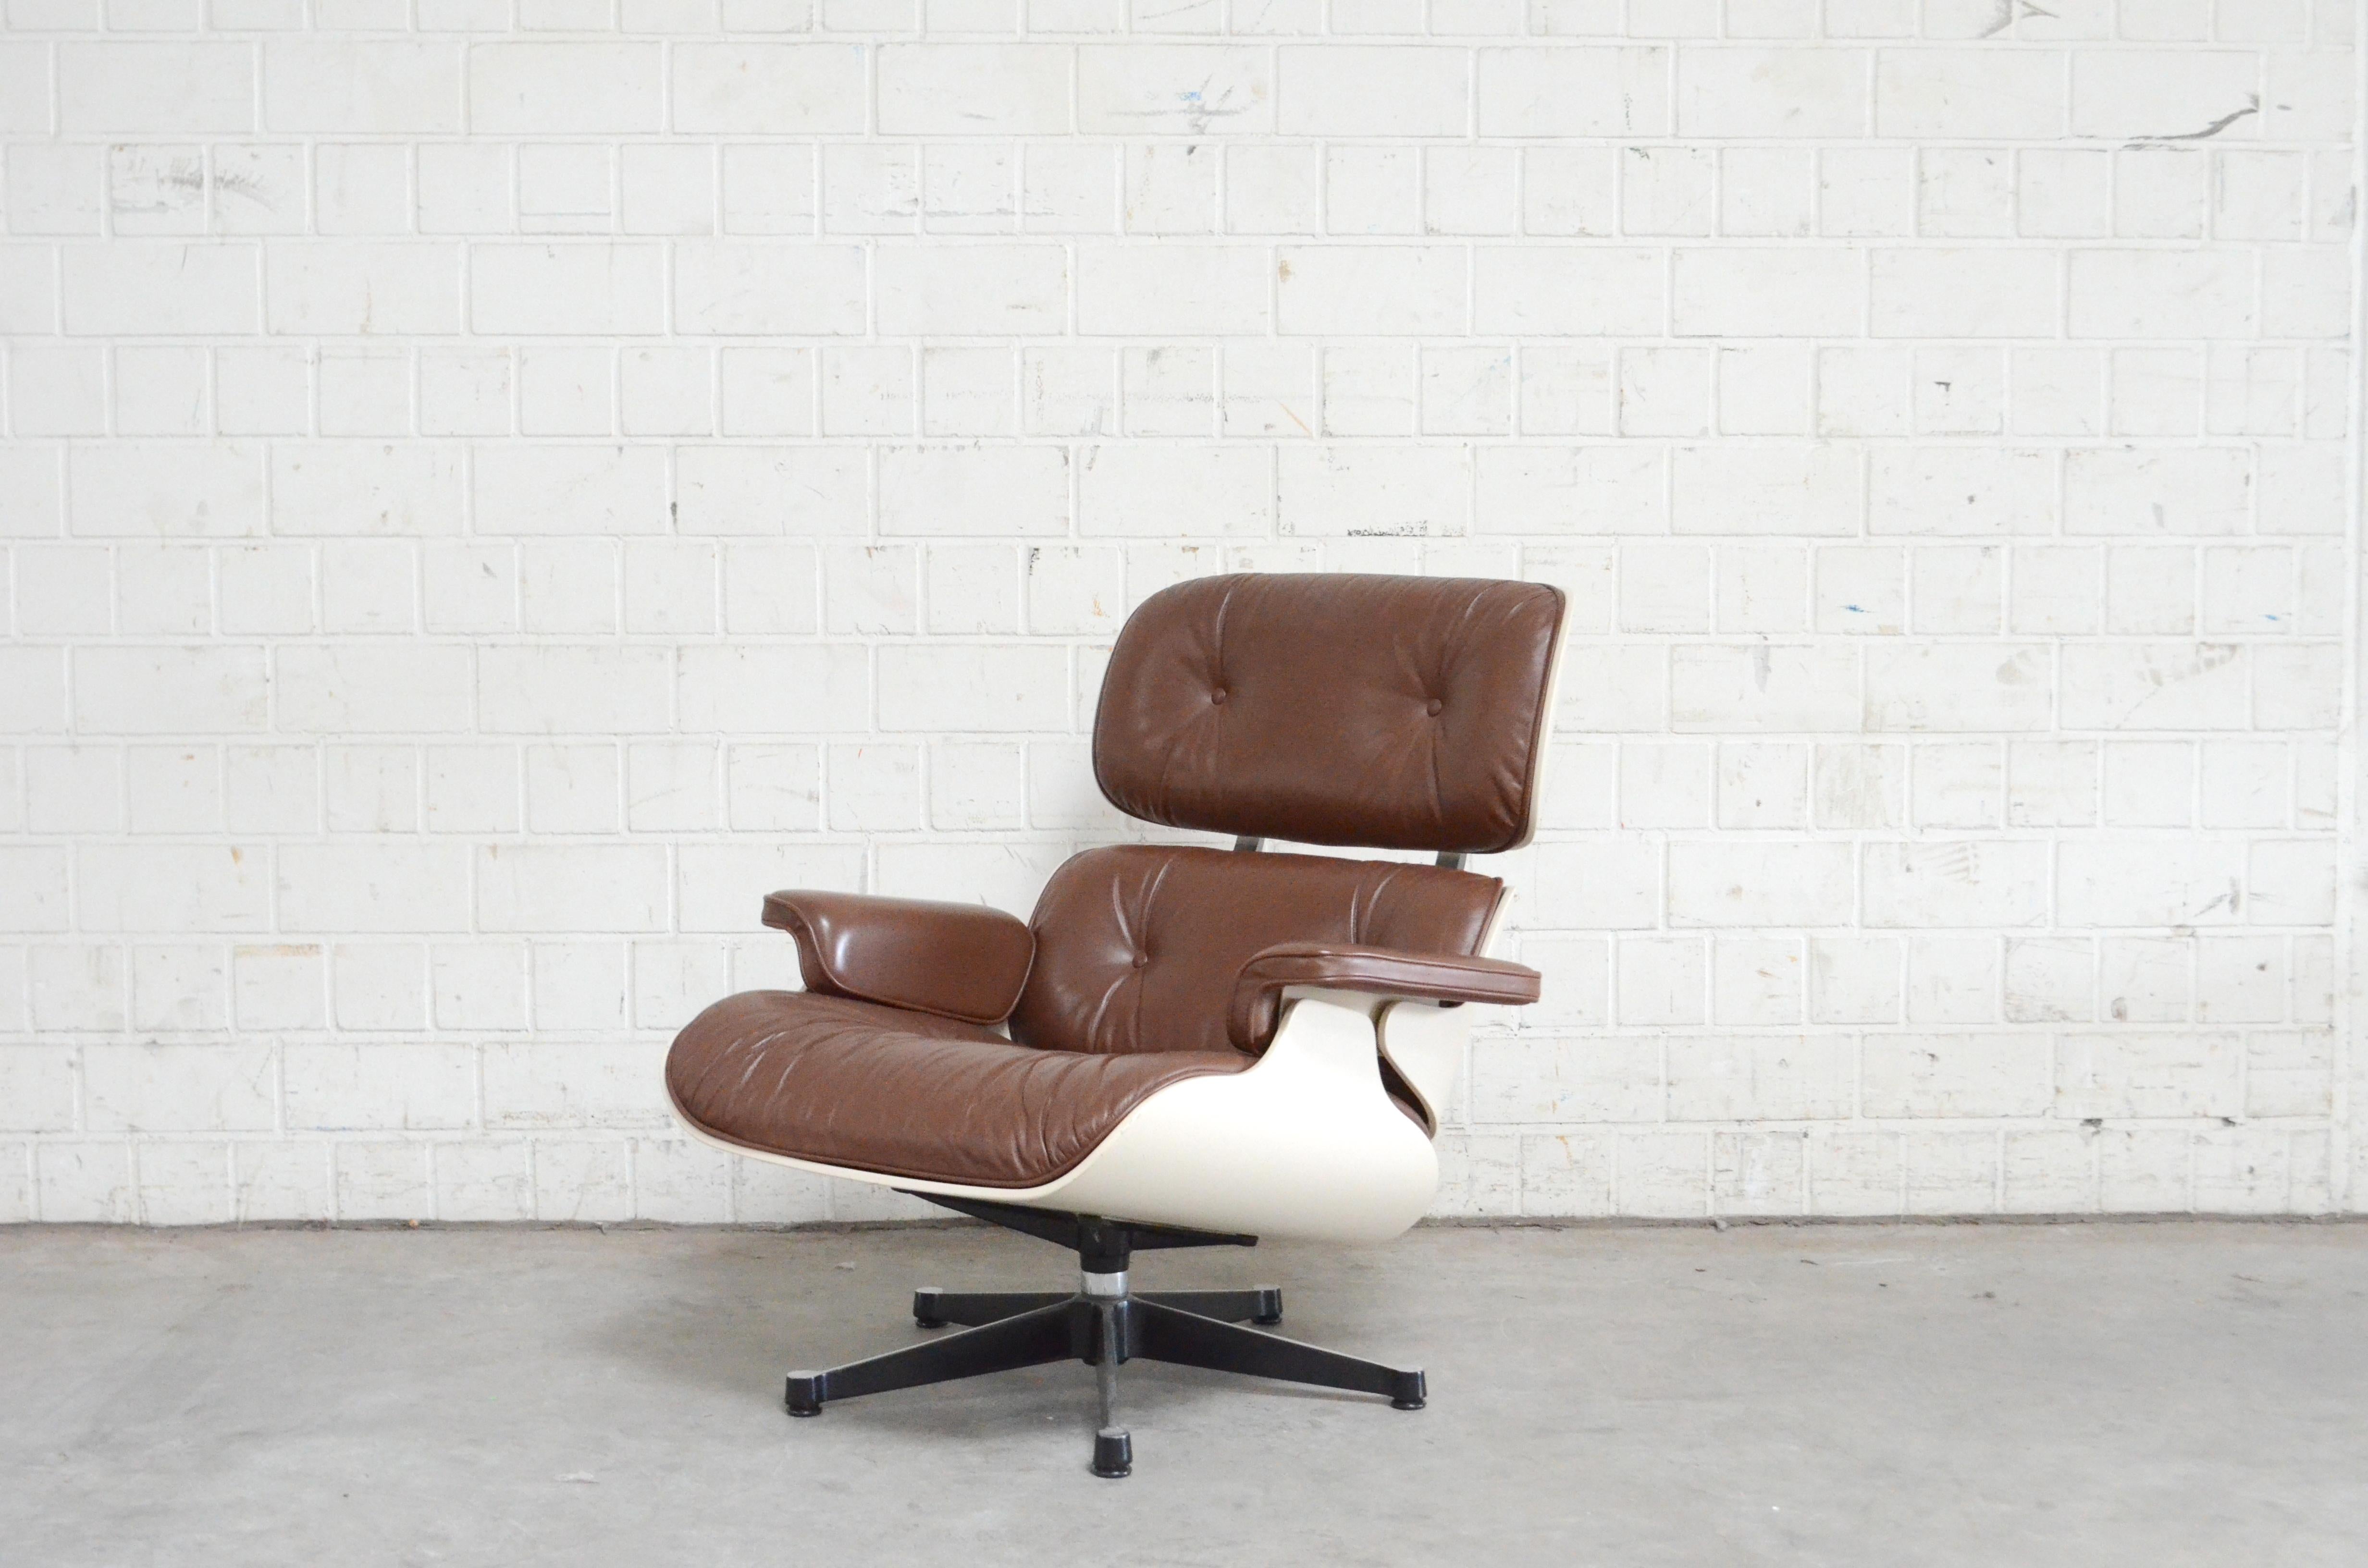 German Vitra Eames Lounge Chair Cognac Brown and White Shell, Set of 2 For Sale